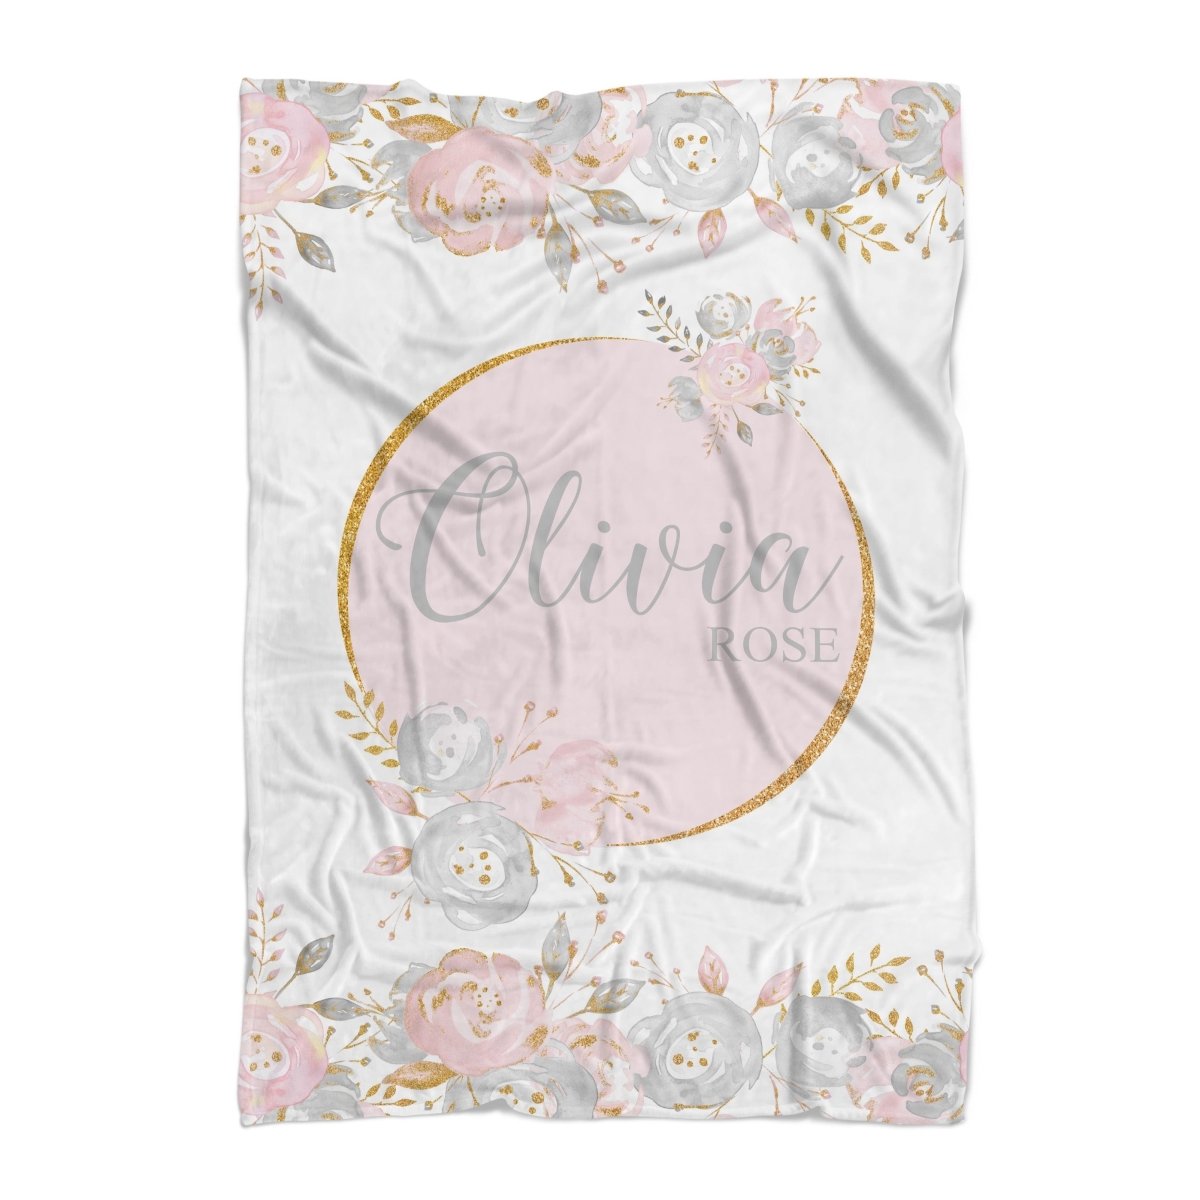 Blush Gold Floral Personalized Minky Blanket - Blush Gold Floral, gender_girl, Personalized_Yes